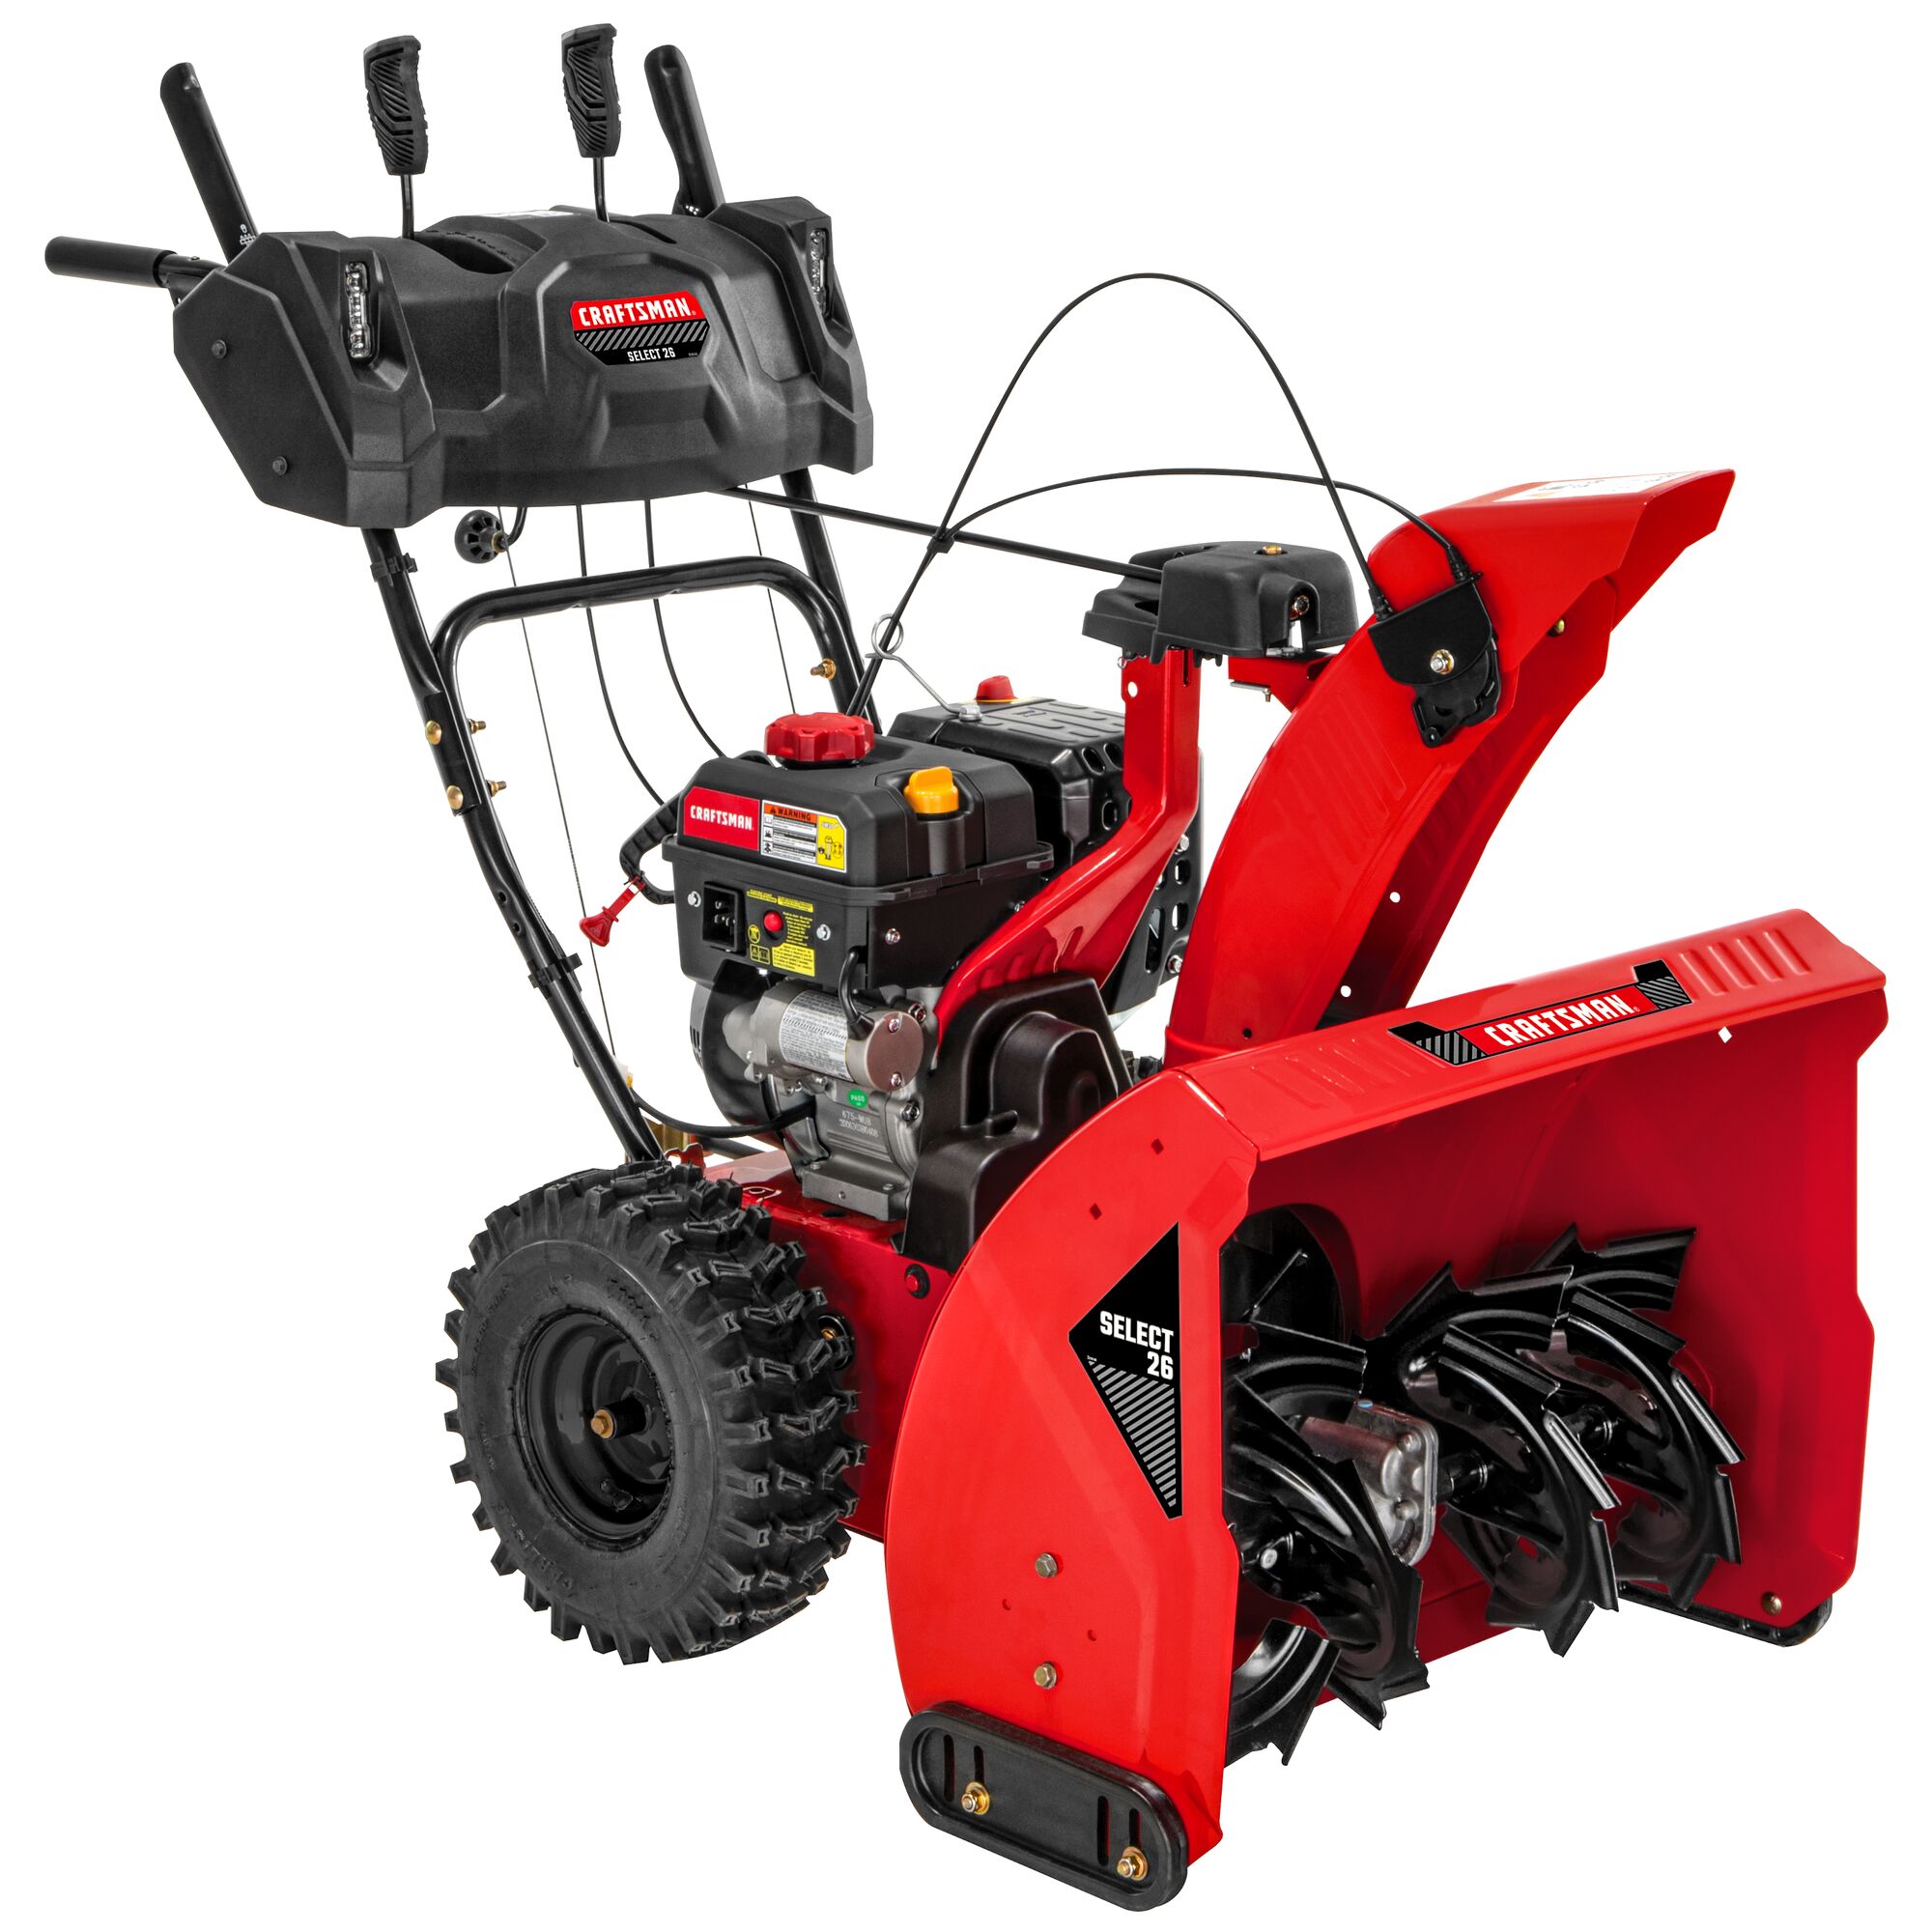 CRAFTSMAN Select 26 in 243 cc 2-Stage Gas Snow Blower on white background